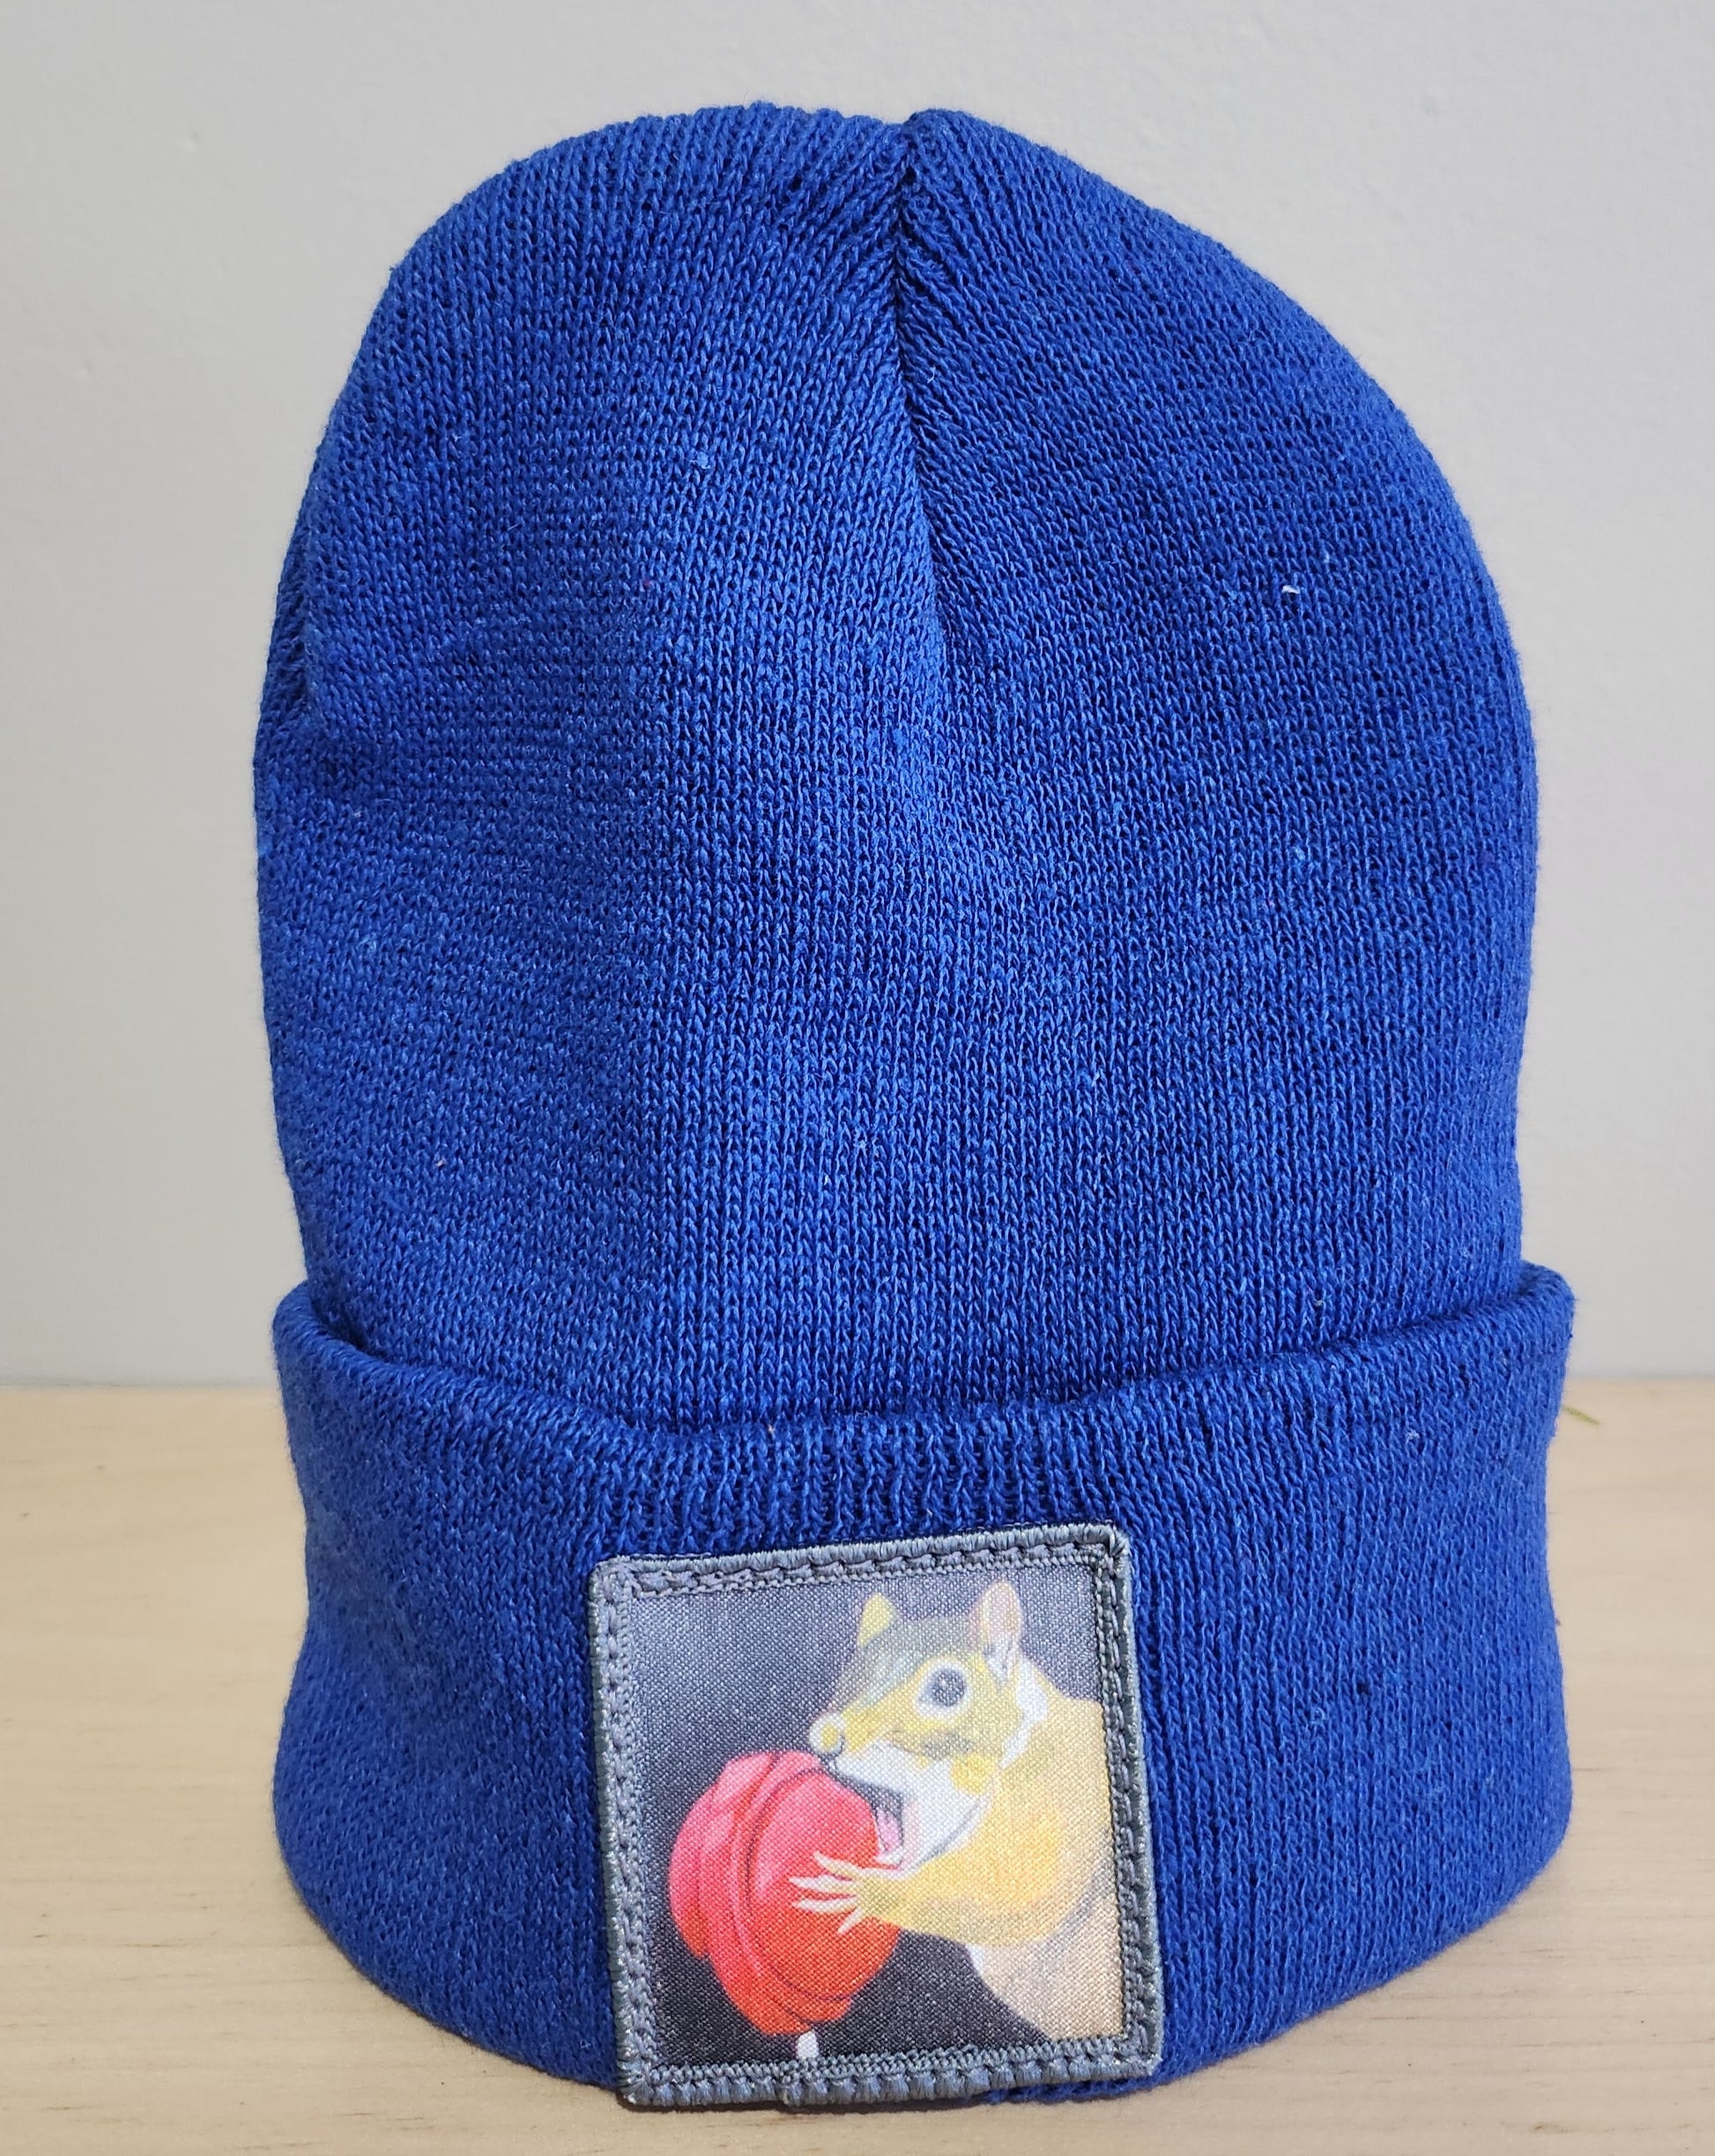 Lolly Toddler Beanie Hats FlynHats   